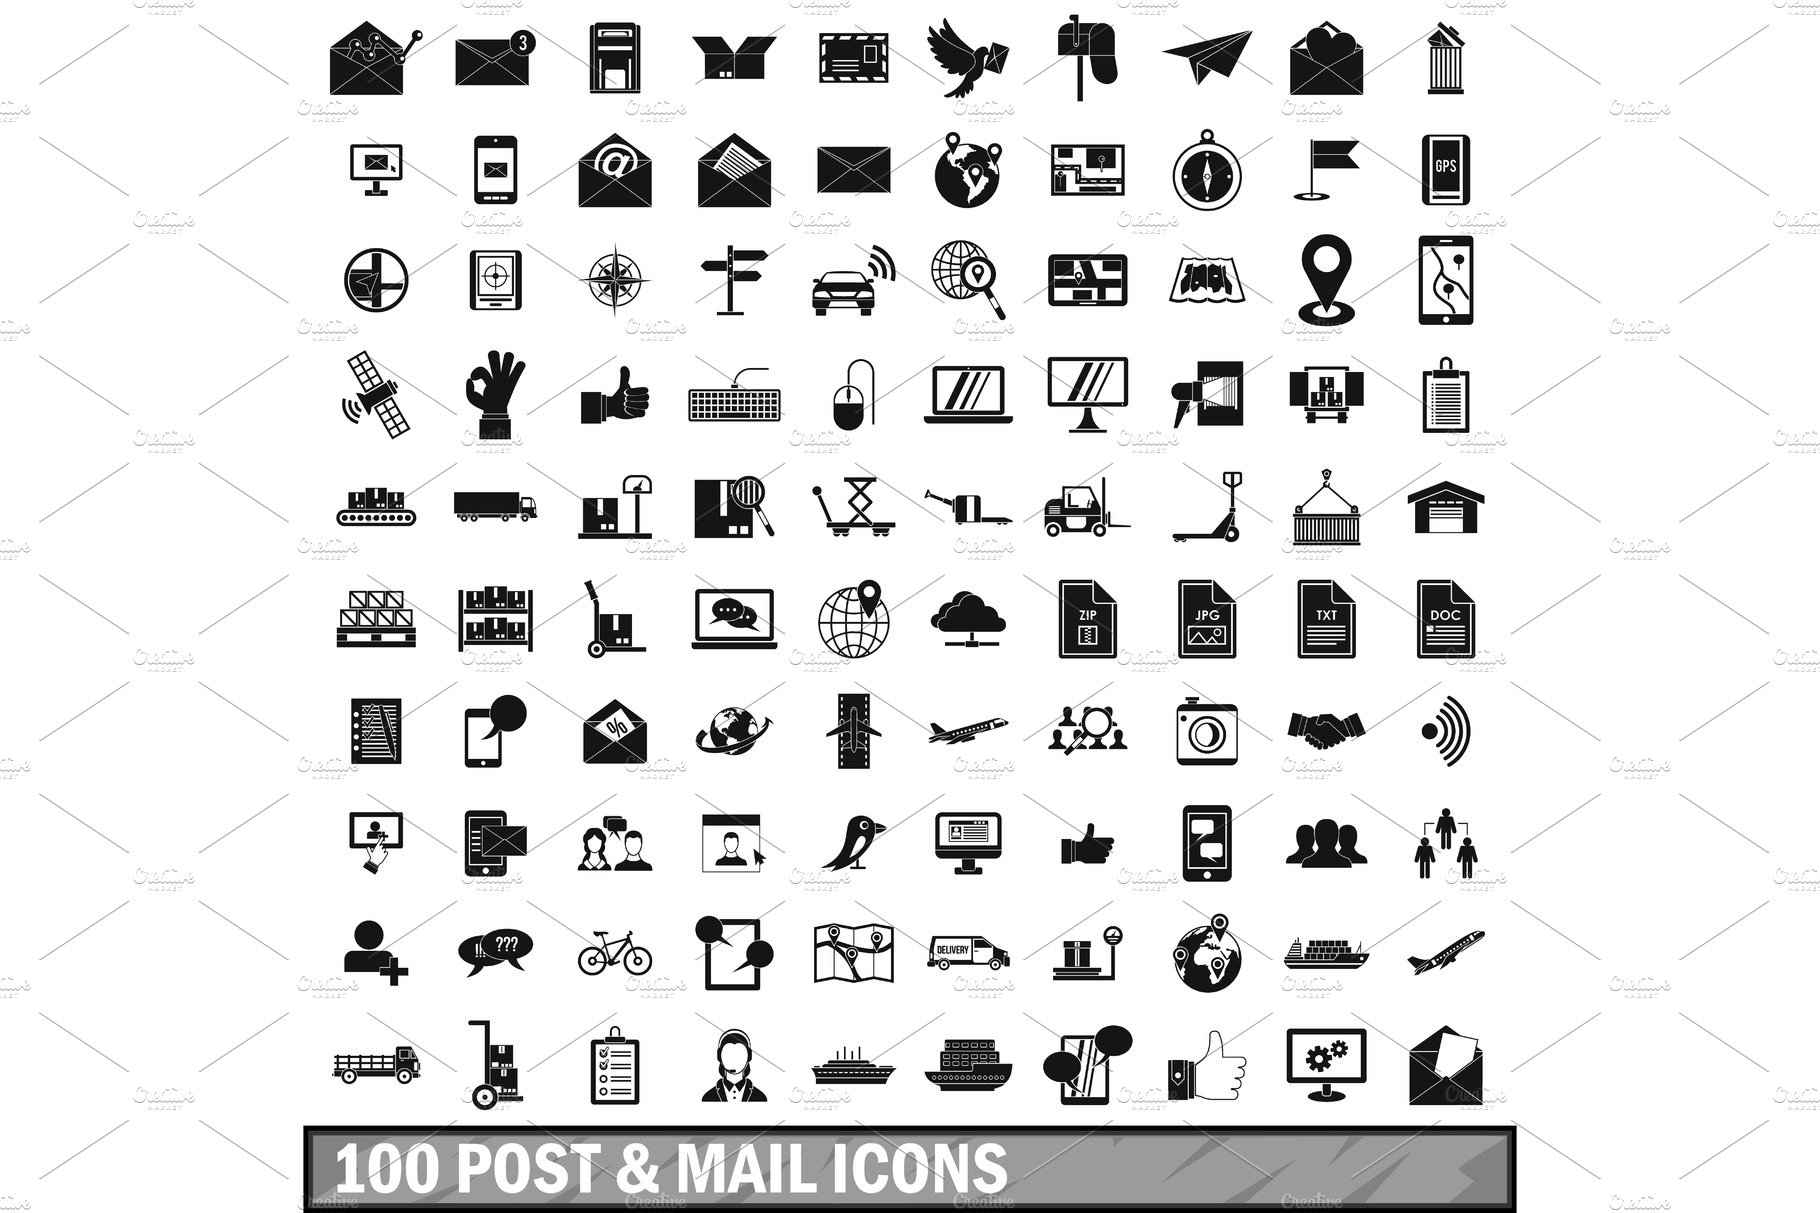 100 post and mail icons set in cover image.